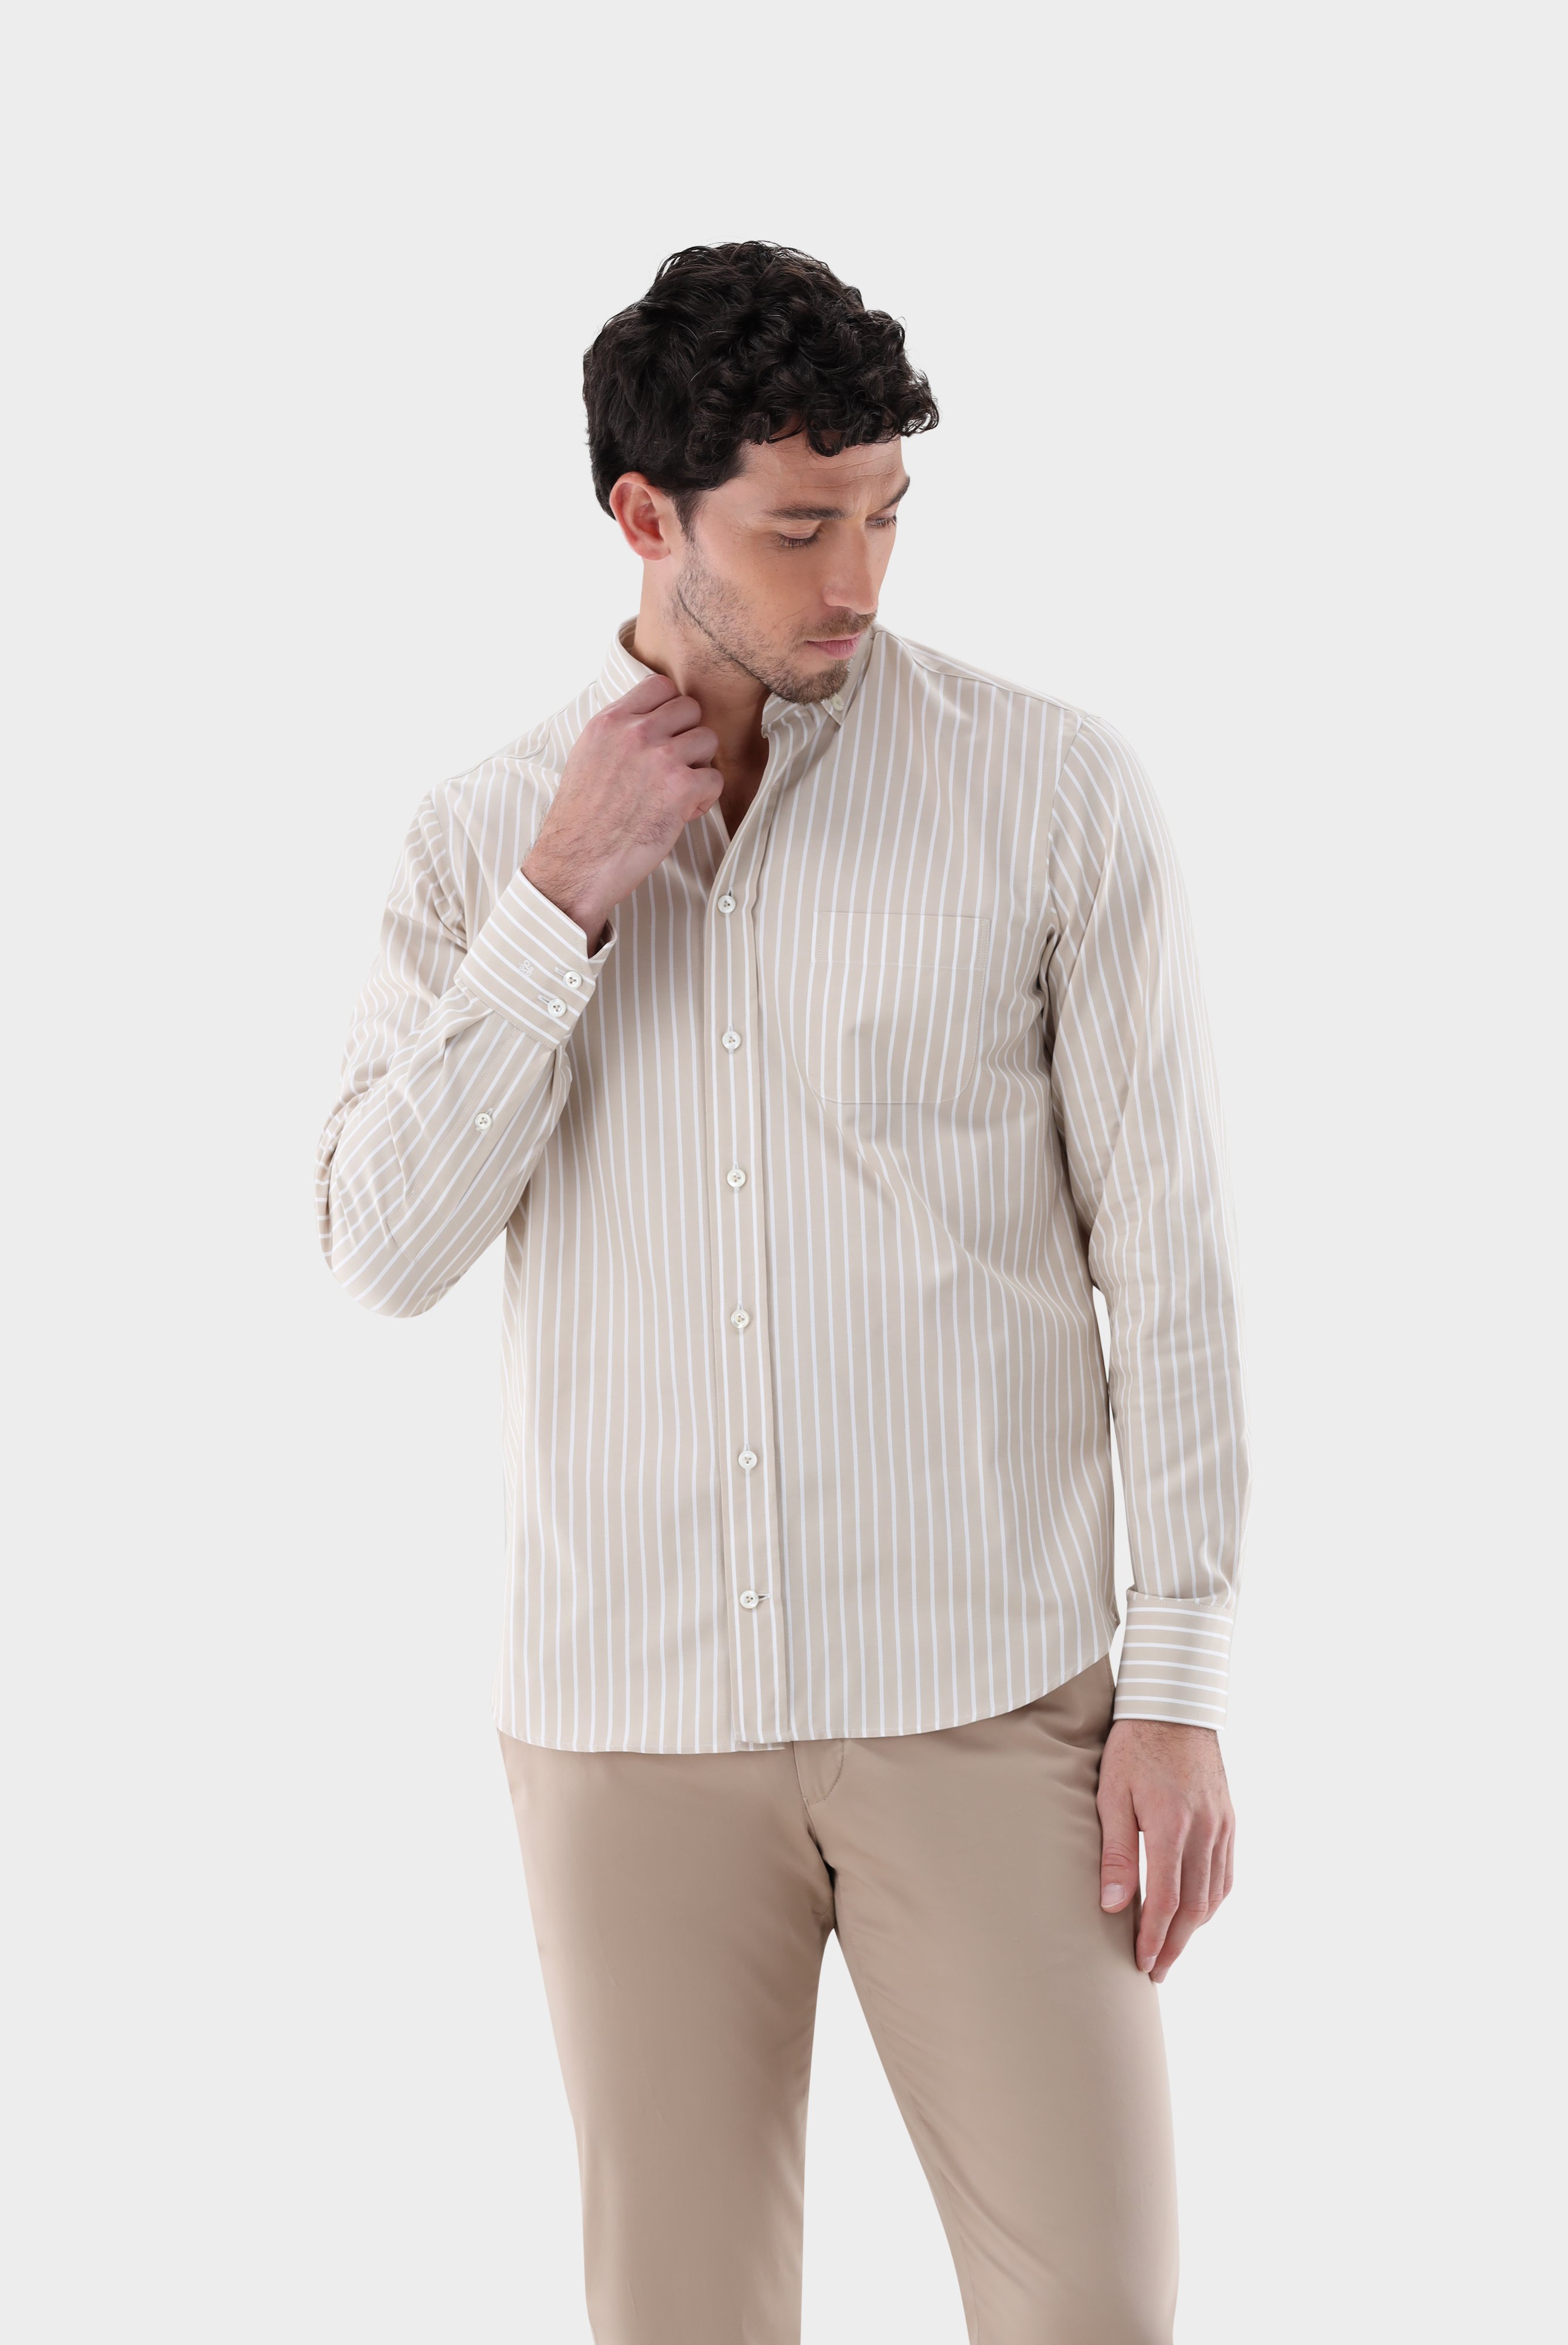 Casual Shirts+Striped Oxford Shirt Tailor Fit+20.2013.AV.151956.120.38